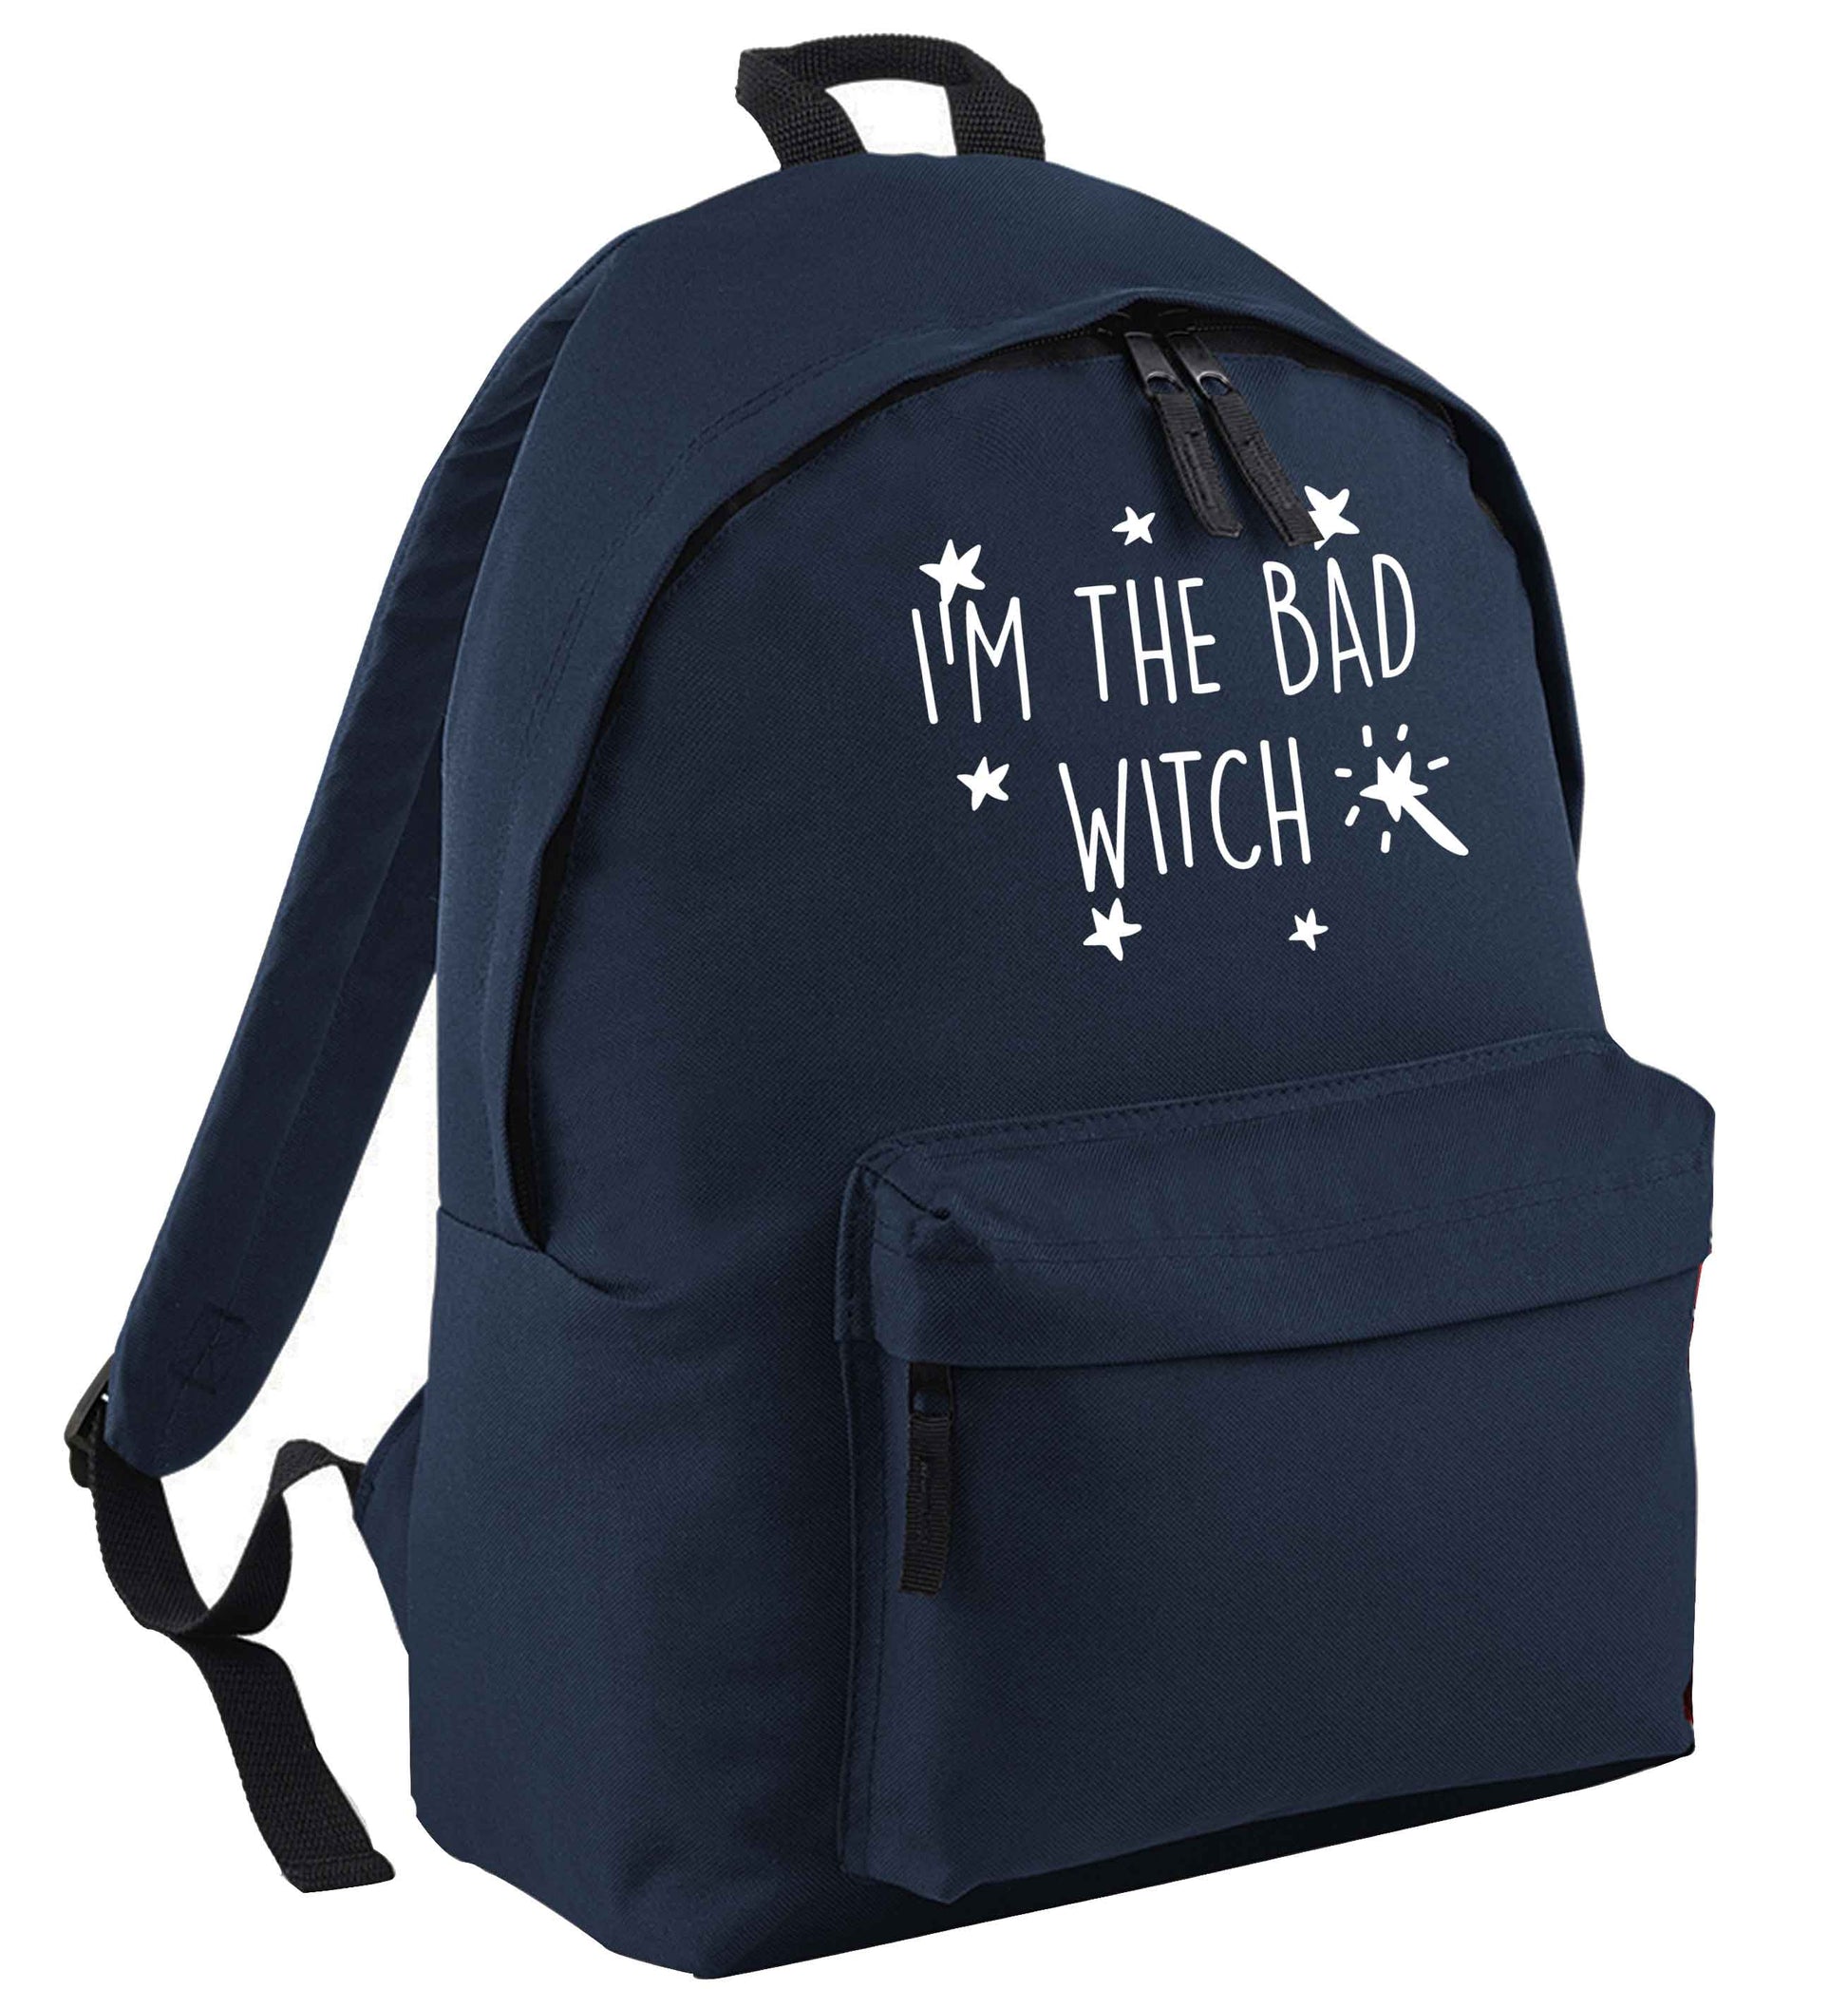 Bad witch navy adults backpack